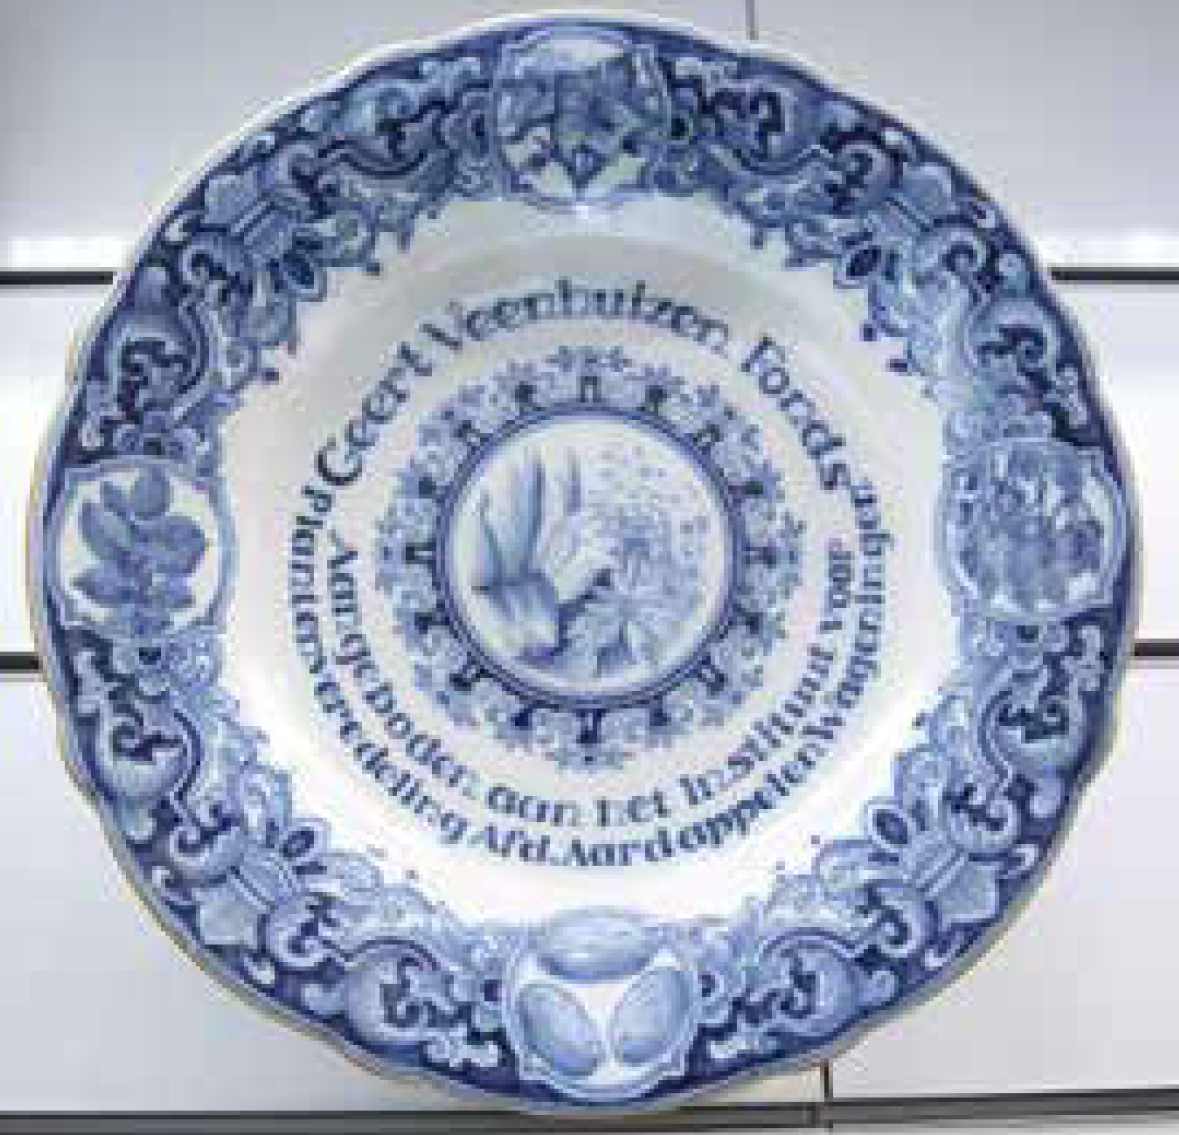 The Geert Veenhuizen Fund plate is an important award for breeders.